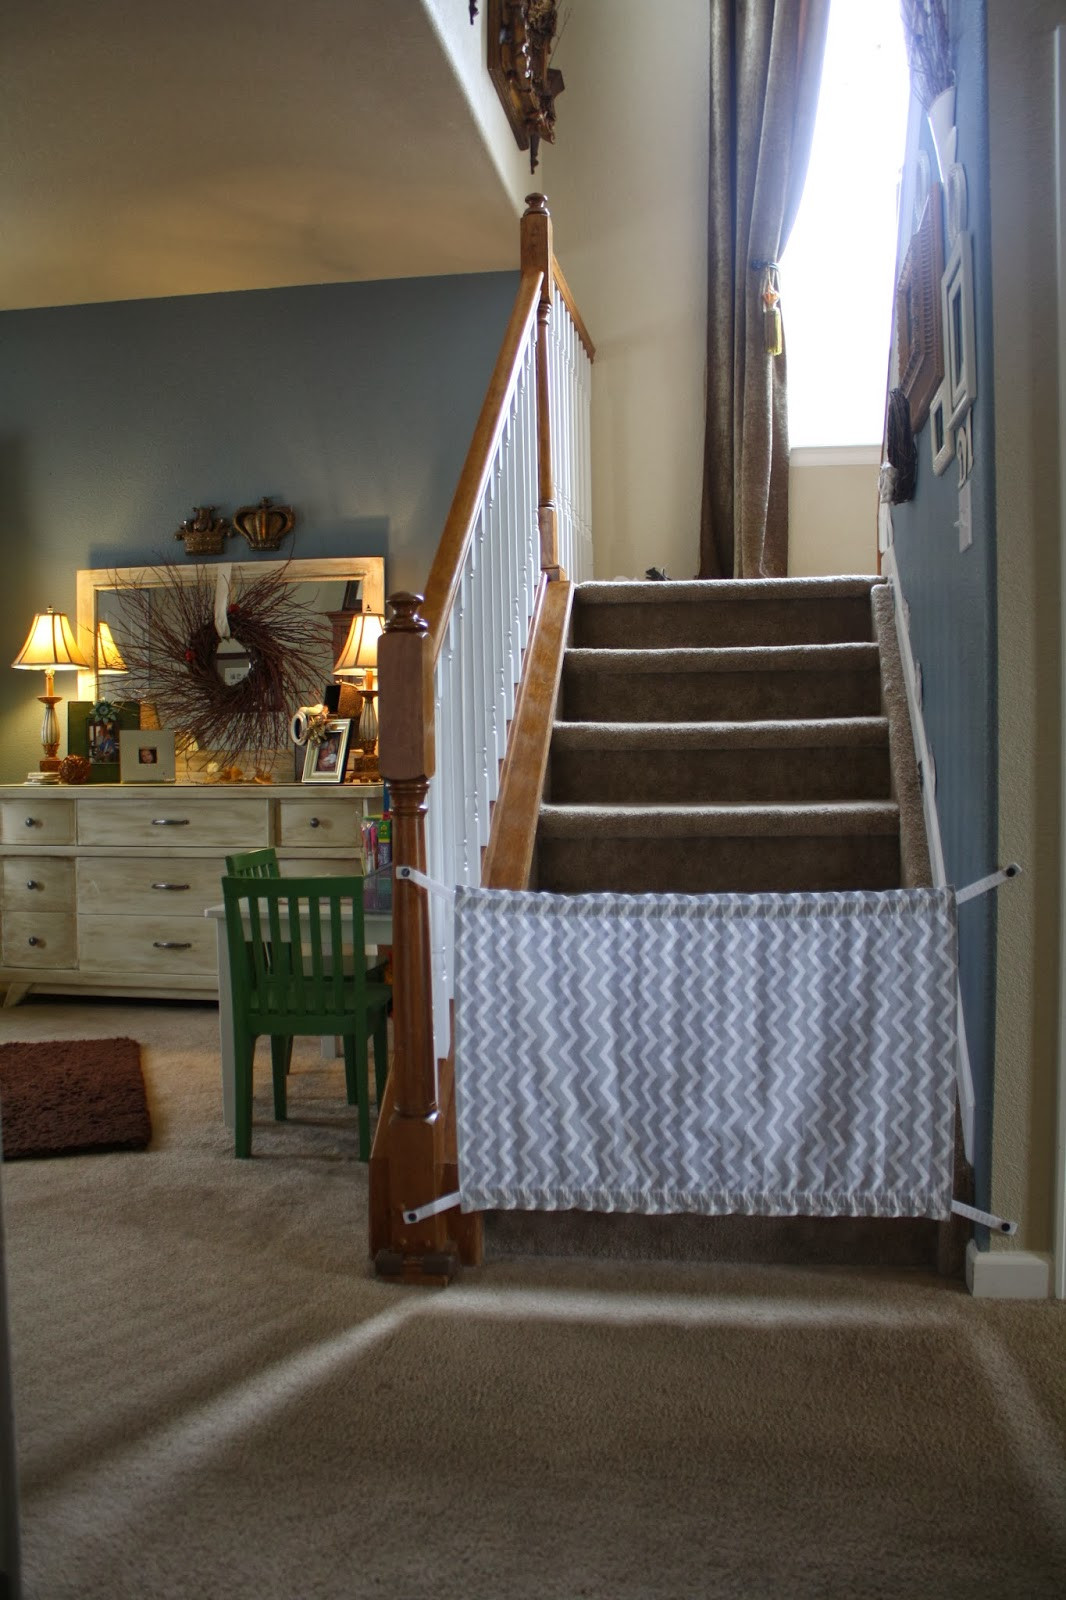 Diy Baby Fence
 McCash Family blog Homemade Baby Gate A Tutorial